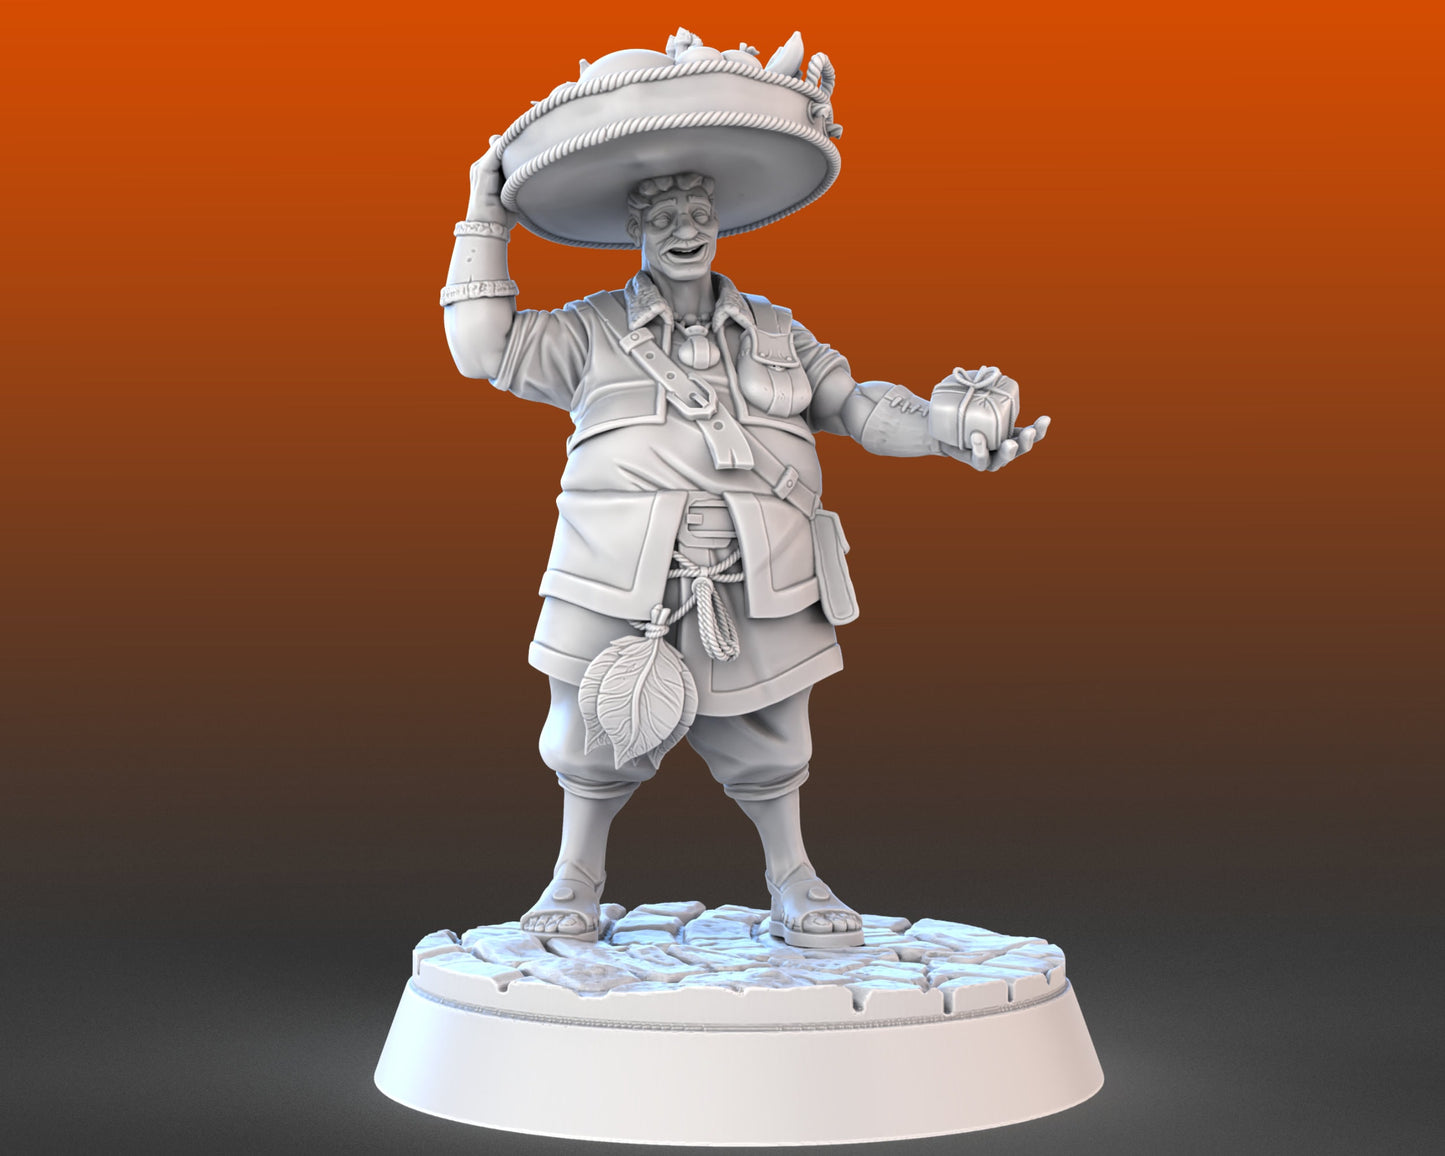 Food Vendors and Props - High Detail Resin 3D Printed Miniatures